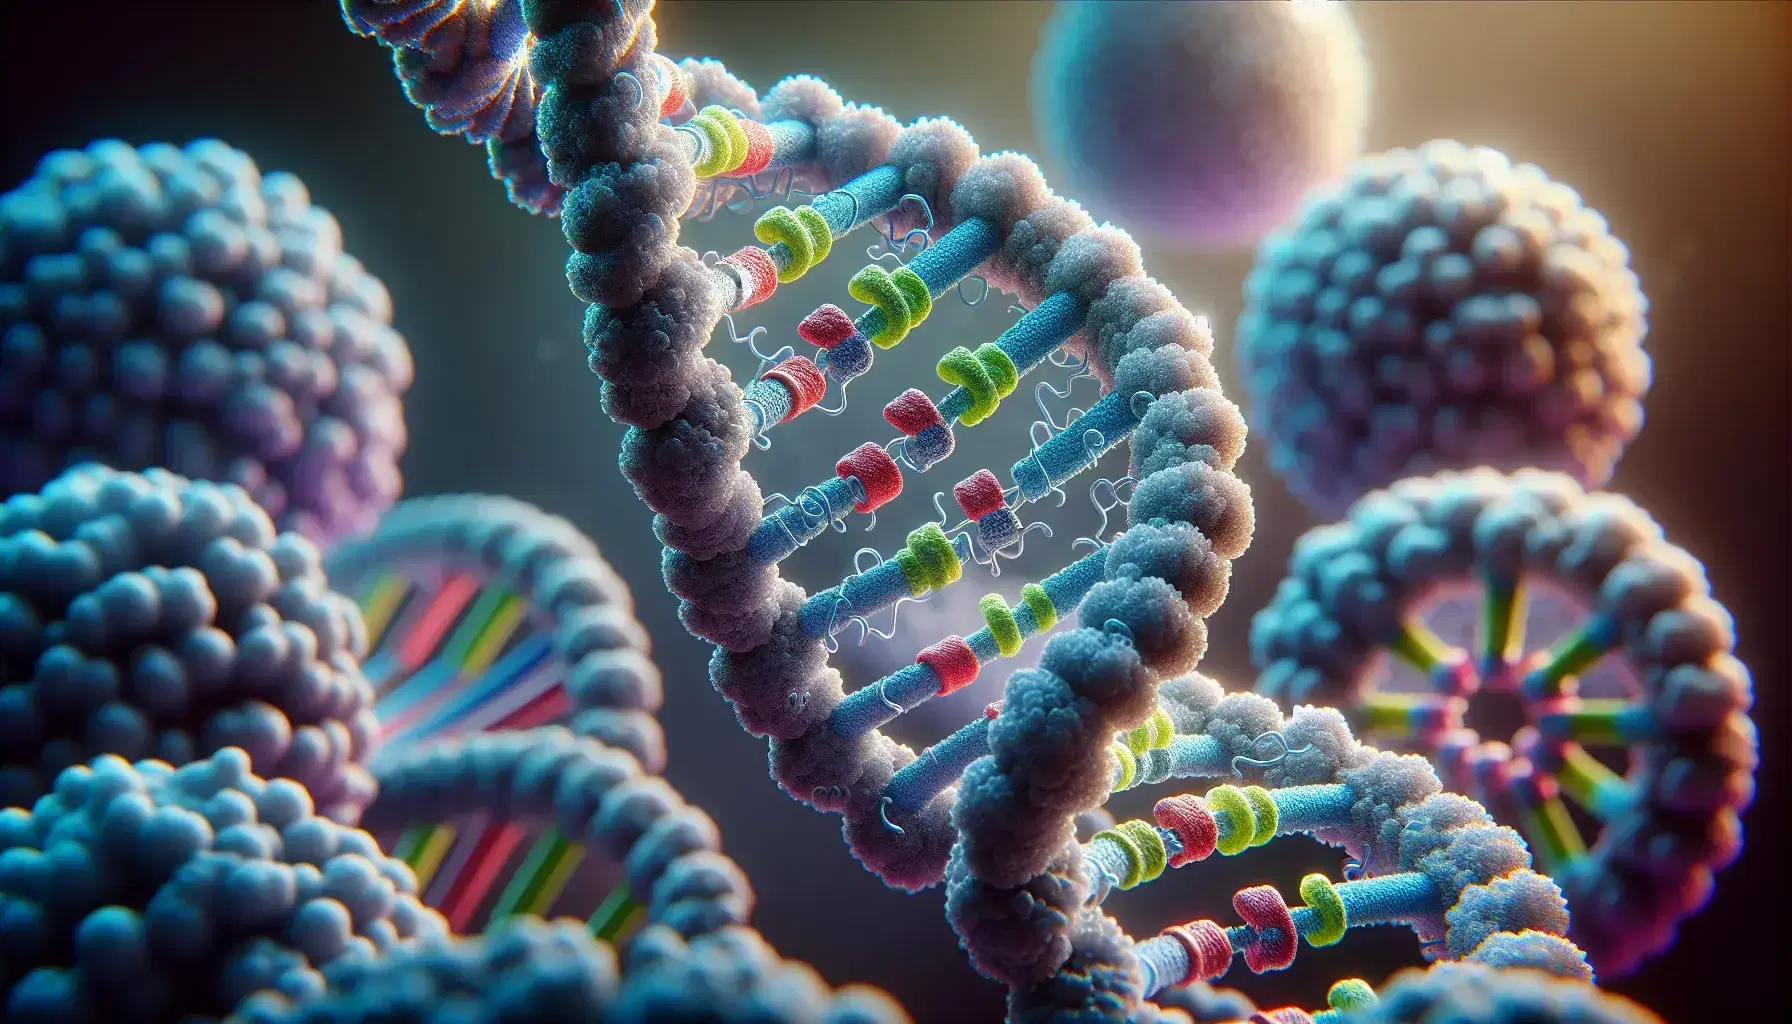 Close-up 3D illustration of a DNA double helix with colored base pairs and a blurred ribosome in the background, set against a light blue gradient.